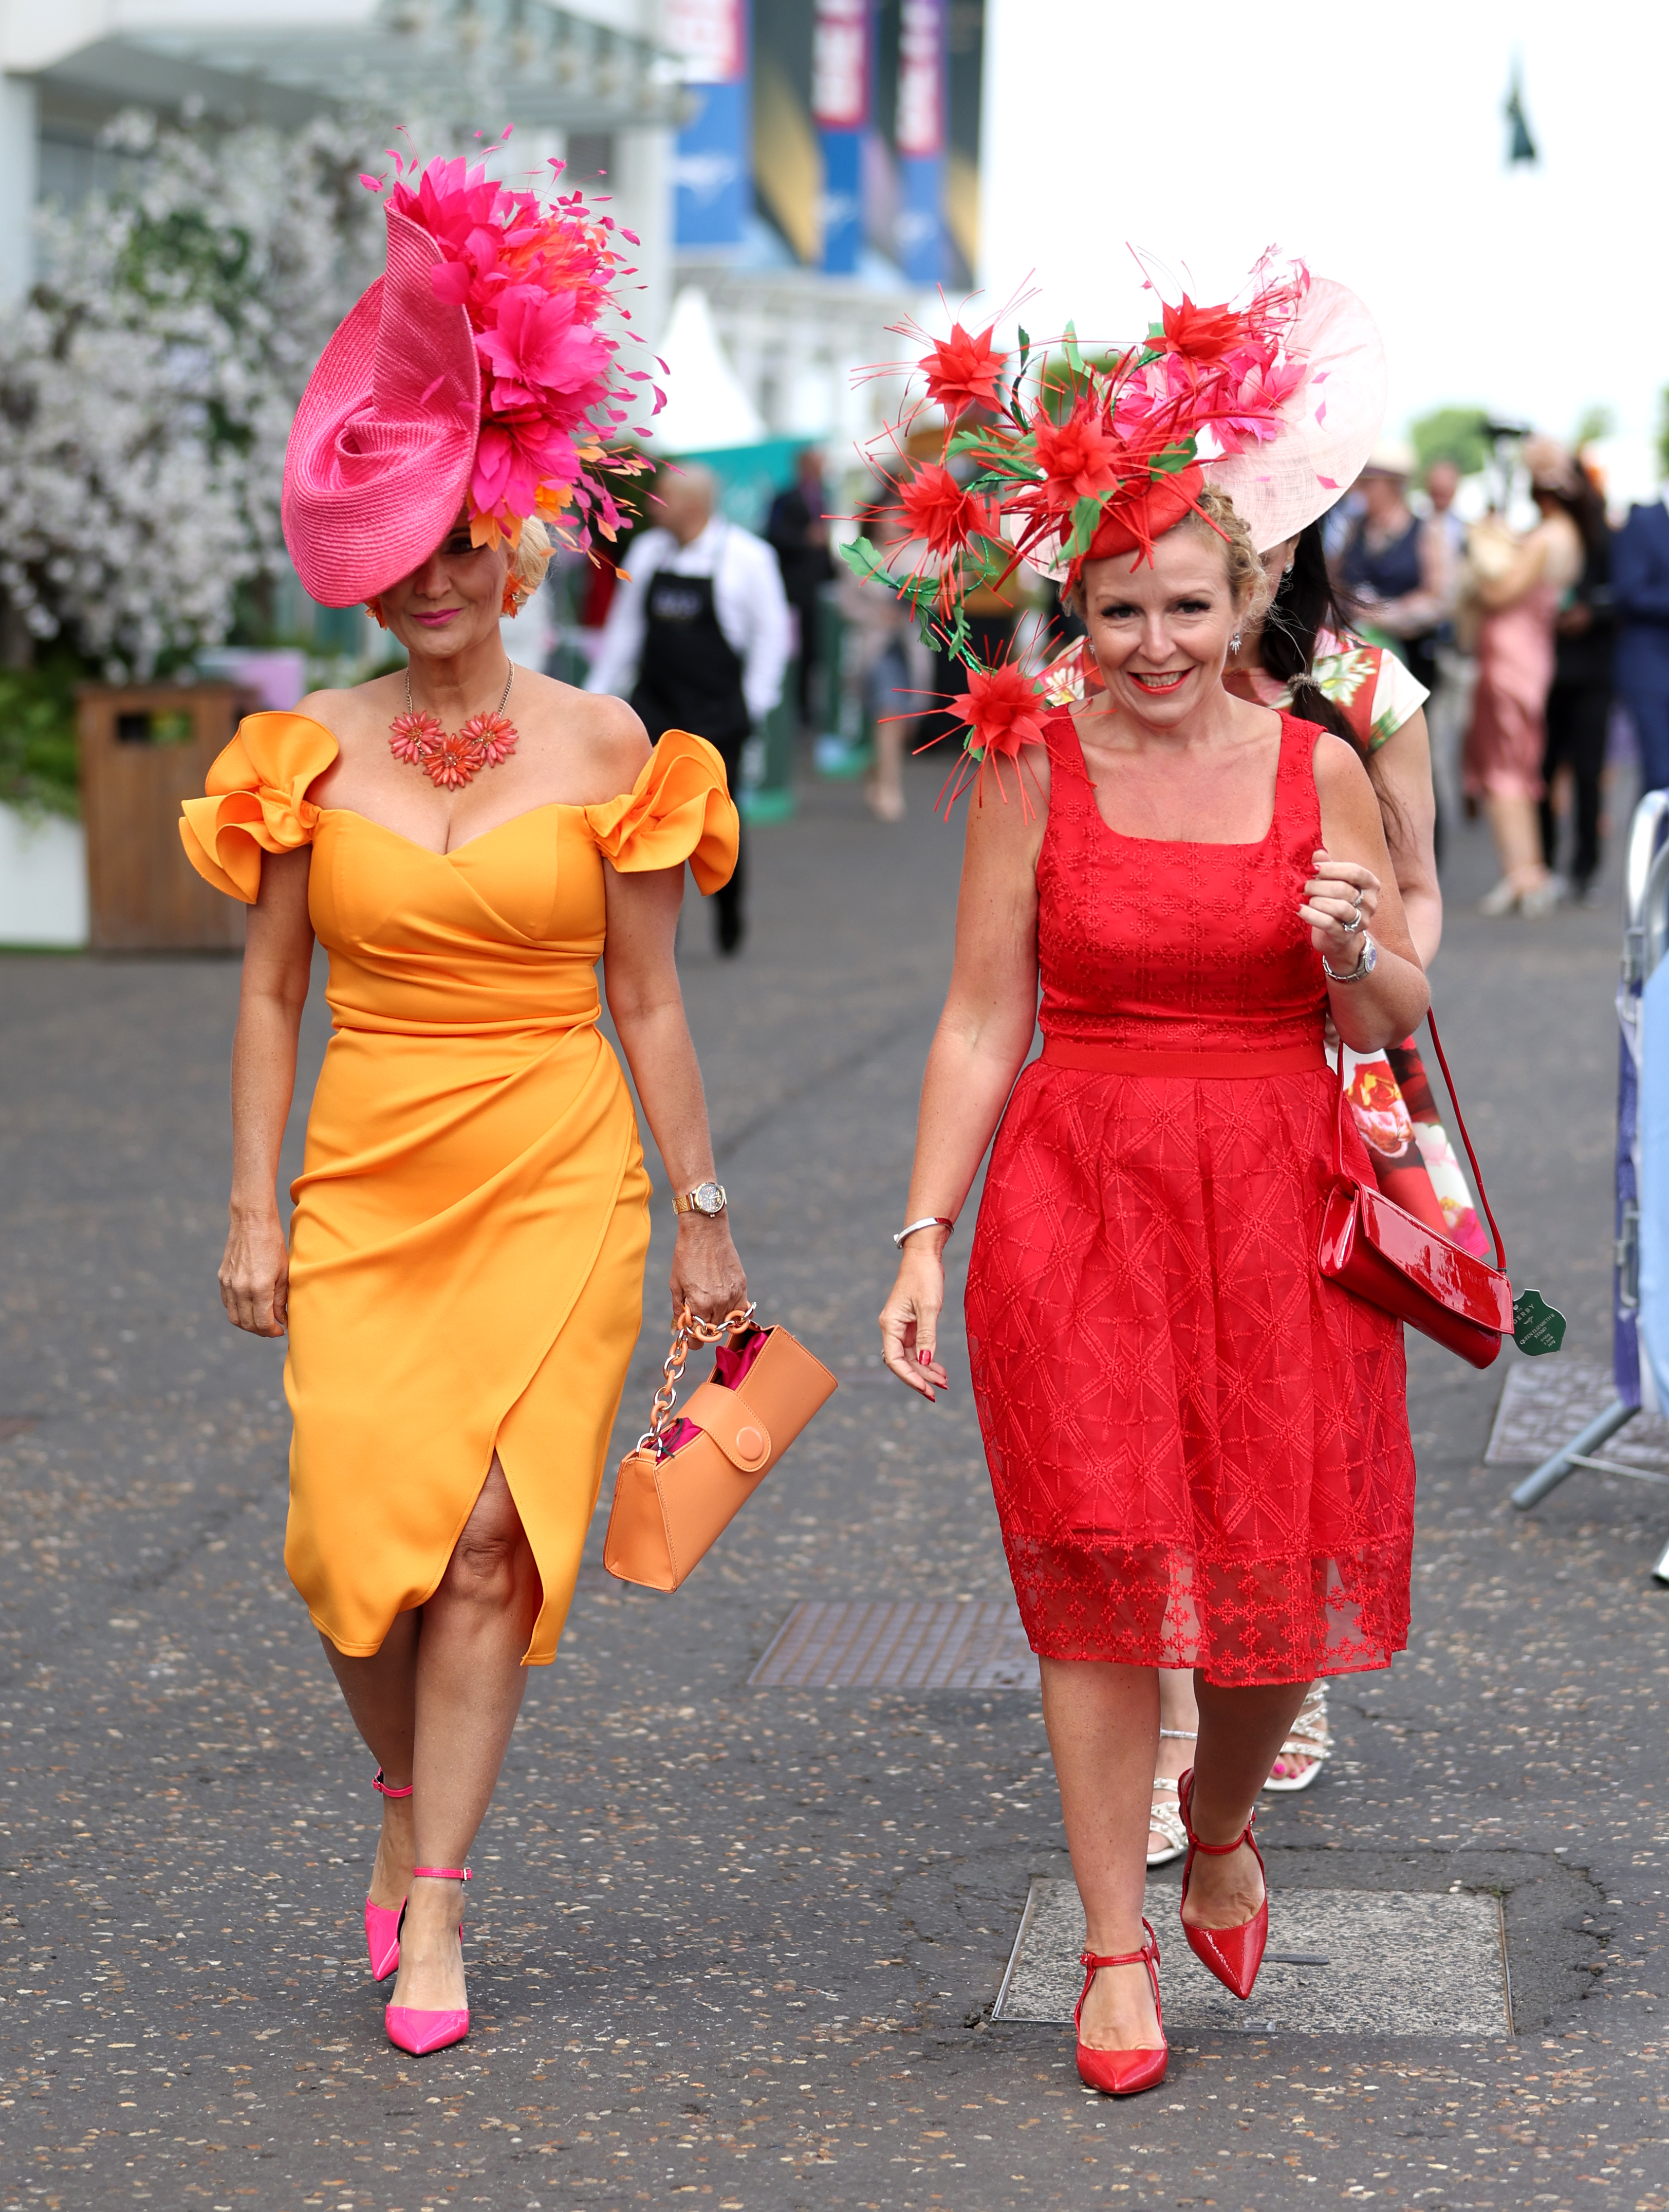 , Stylish racegoers pull out all the stops at Epsom racecourse for Ladies Day with glam dresses and eye-catching hats